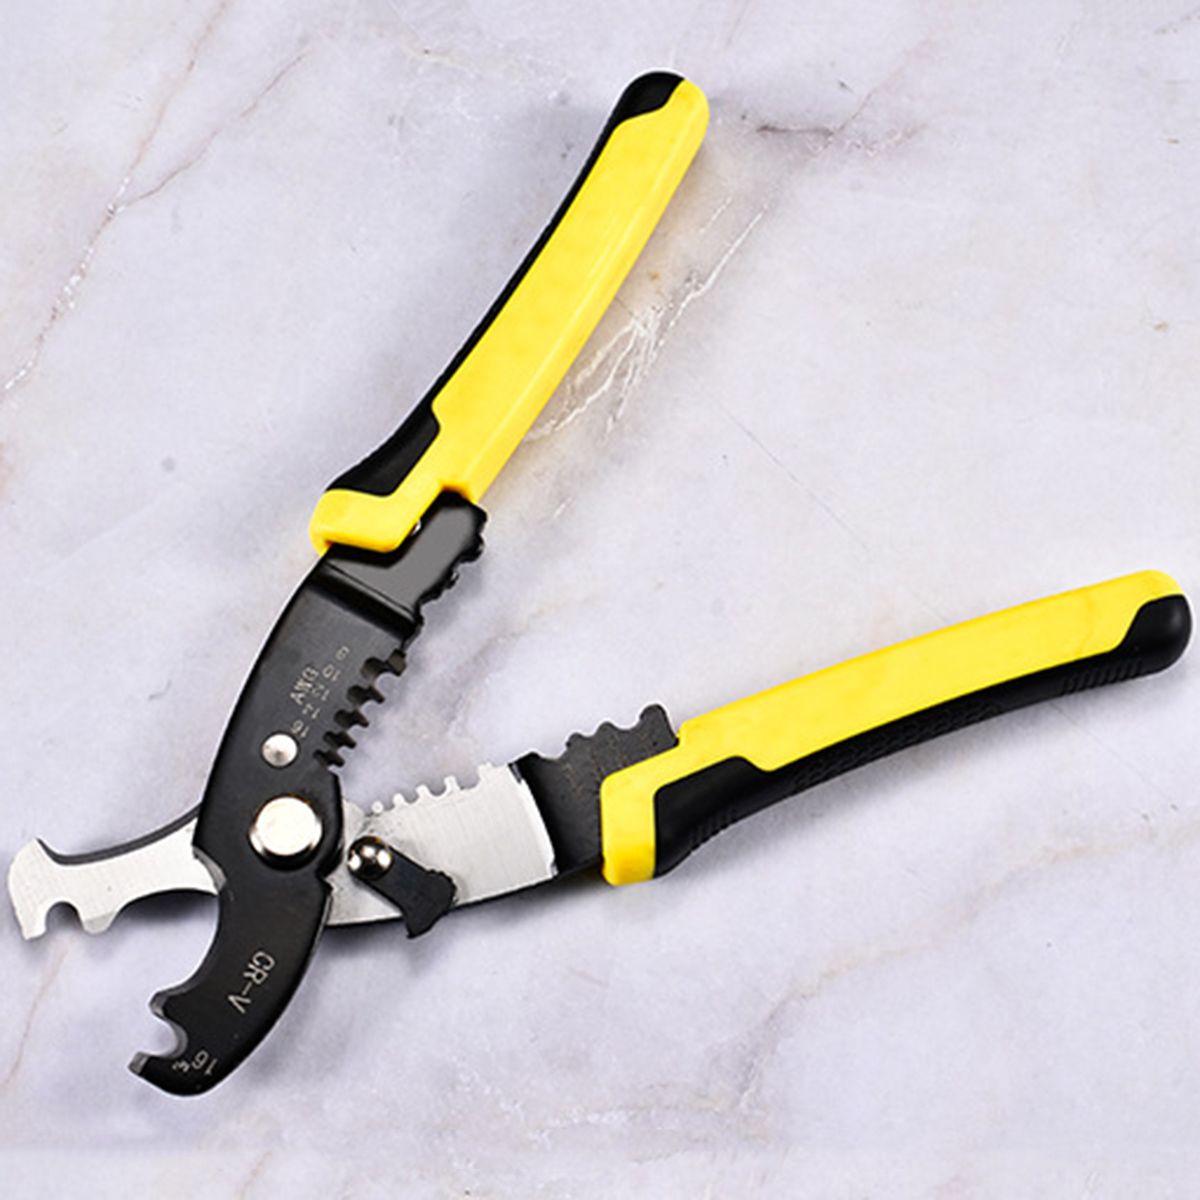 Cable-Wire-Stripper-Cutter-Hand-Crimper-Multifunctional-Terminal-Stripping-Tool-Pliers-Tool-1563142